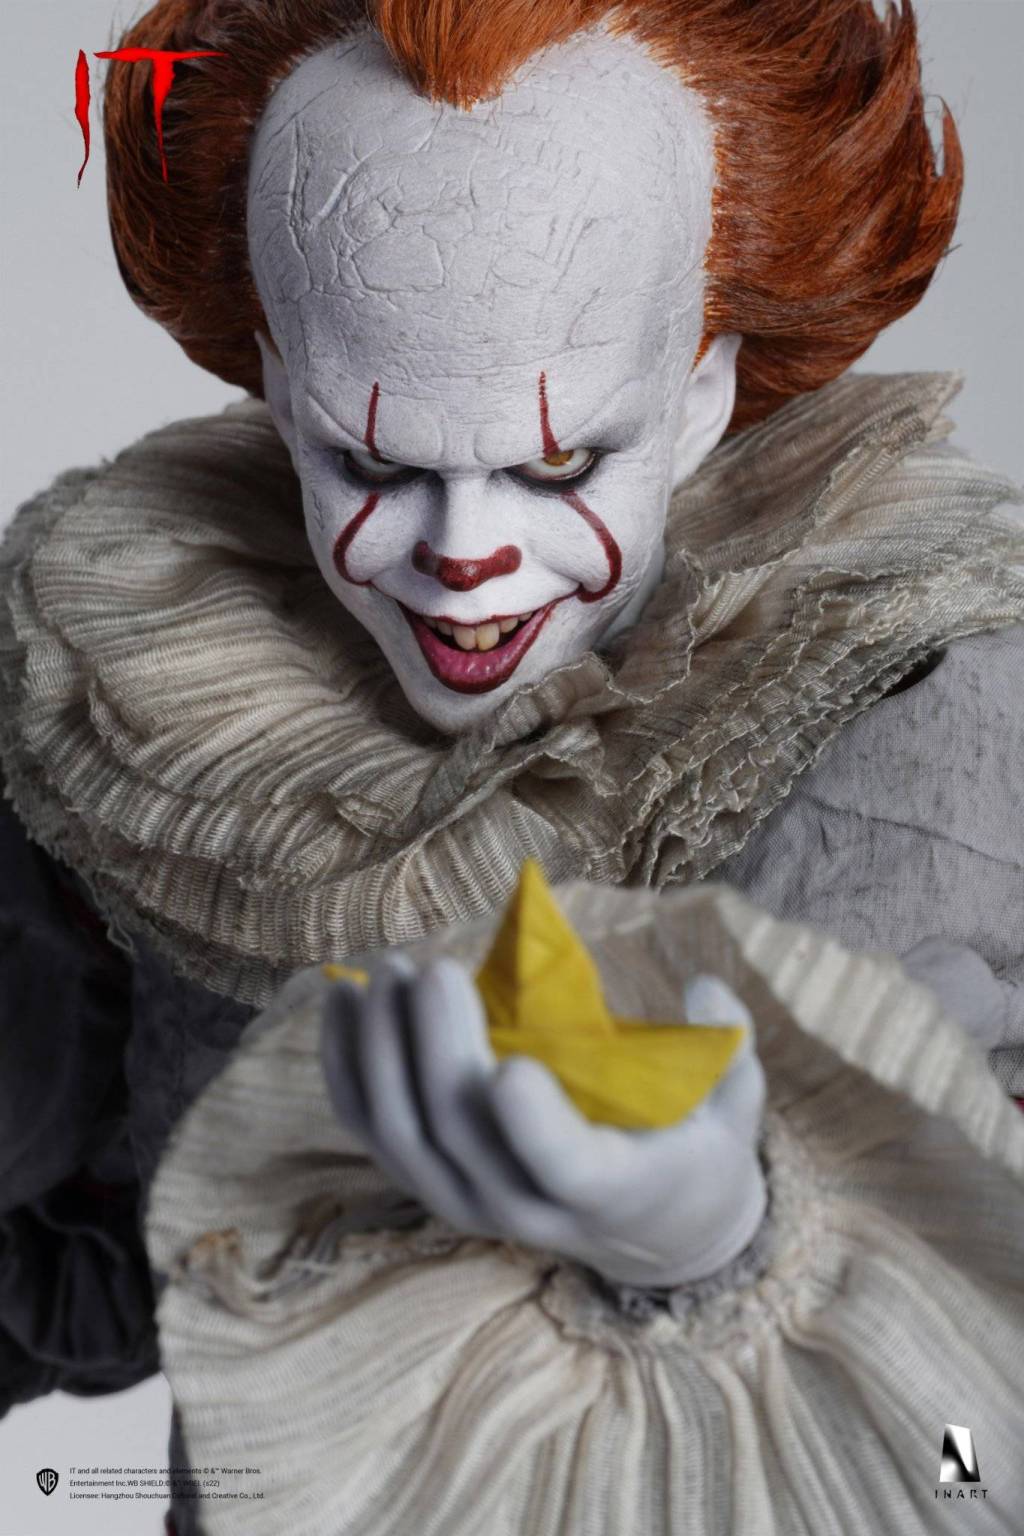 A Look At Pennywise Sixth Scale Premium Edition Action Figure by InArt Coming in 2023.